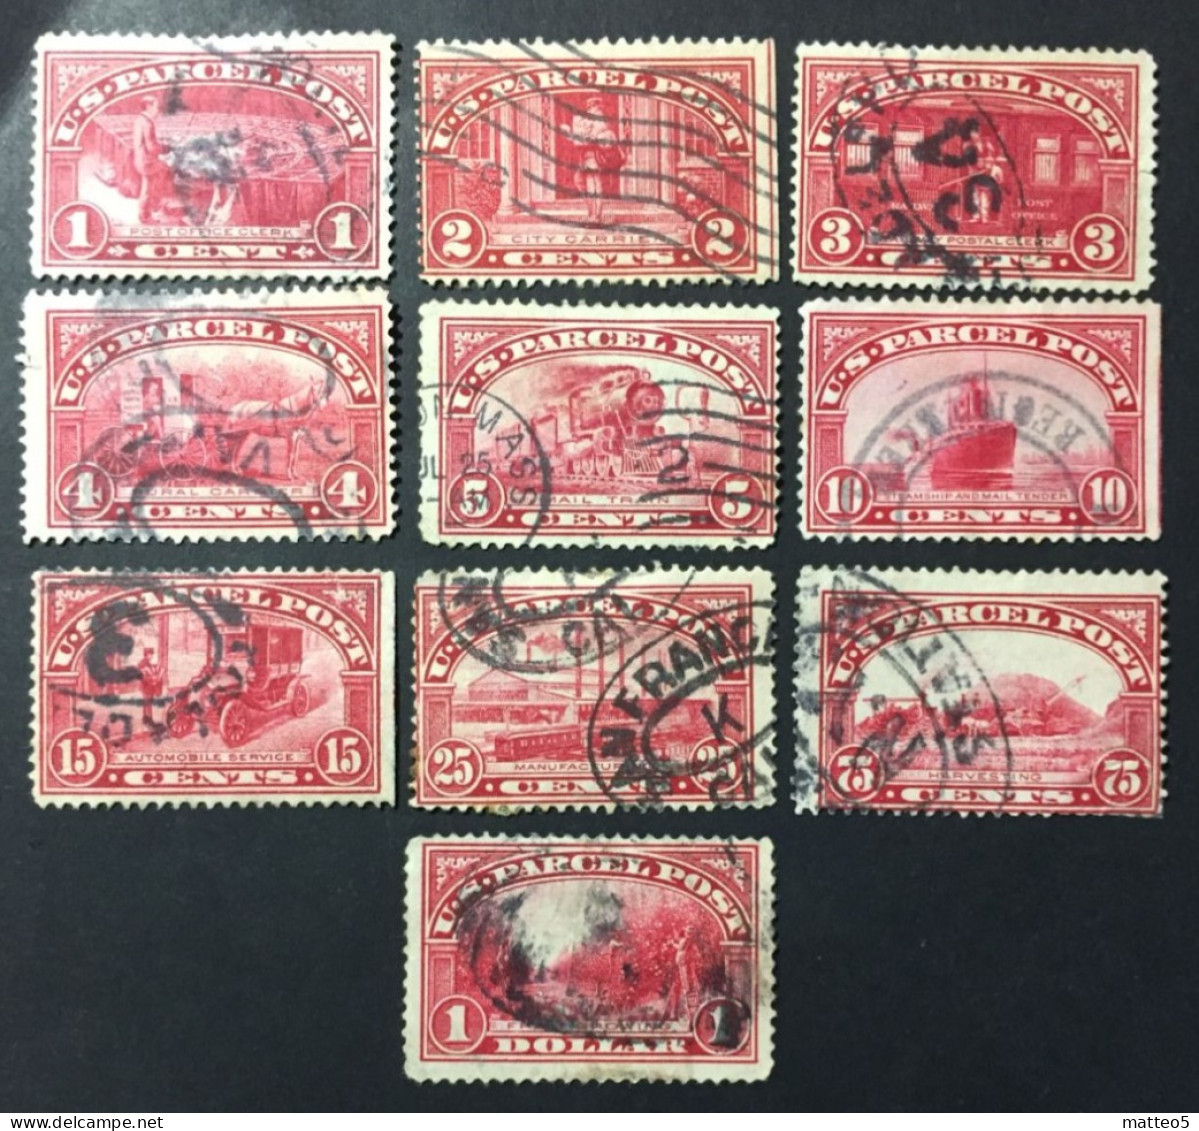 1912 - United States - Parcel Post Colonies Postage Due With - 10 Stamps - Used - Oficial